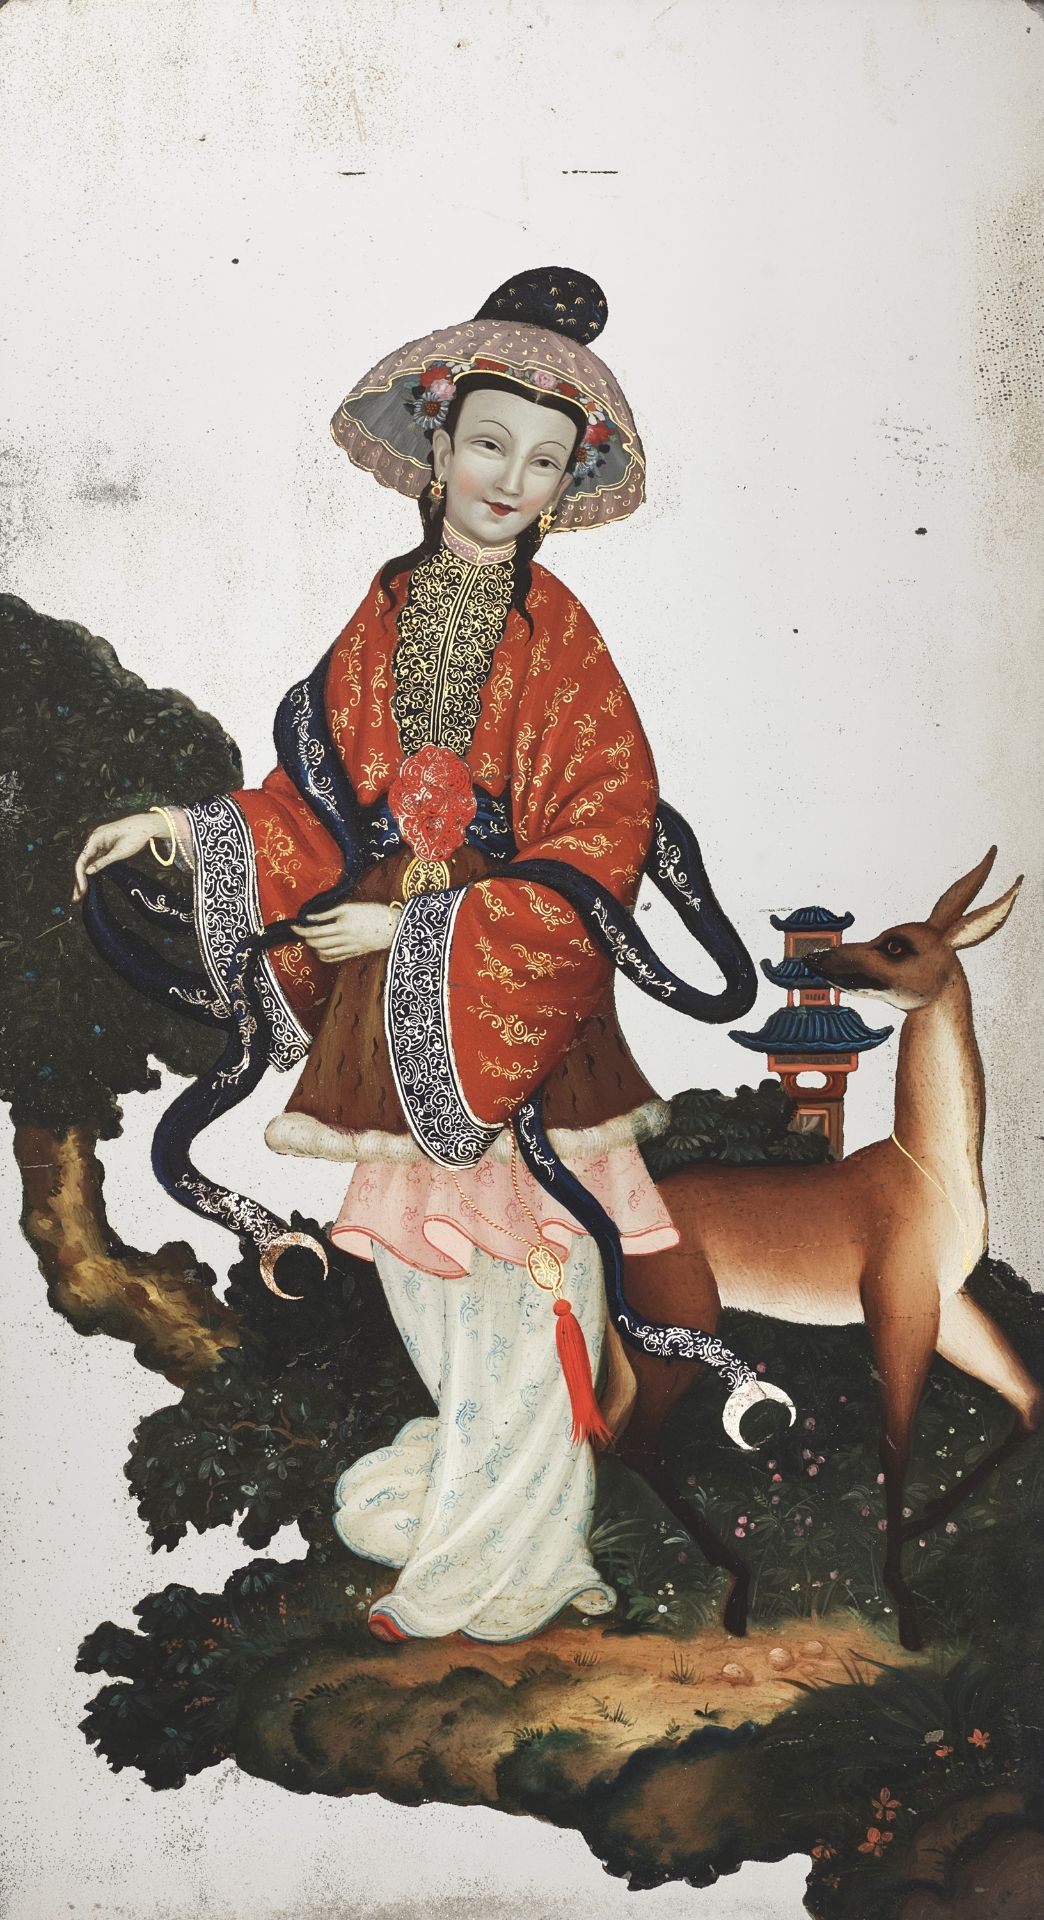 A REVERSE-GLASS MIRROR PAINTING OF A NOBLE LADY WITH DEER, CANTON SCHOOL, QING DYNASTY